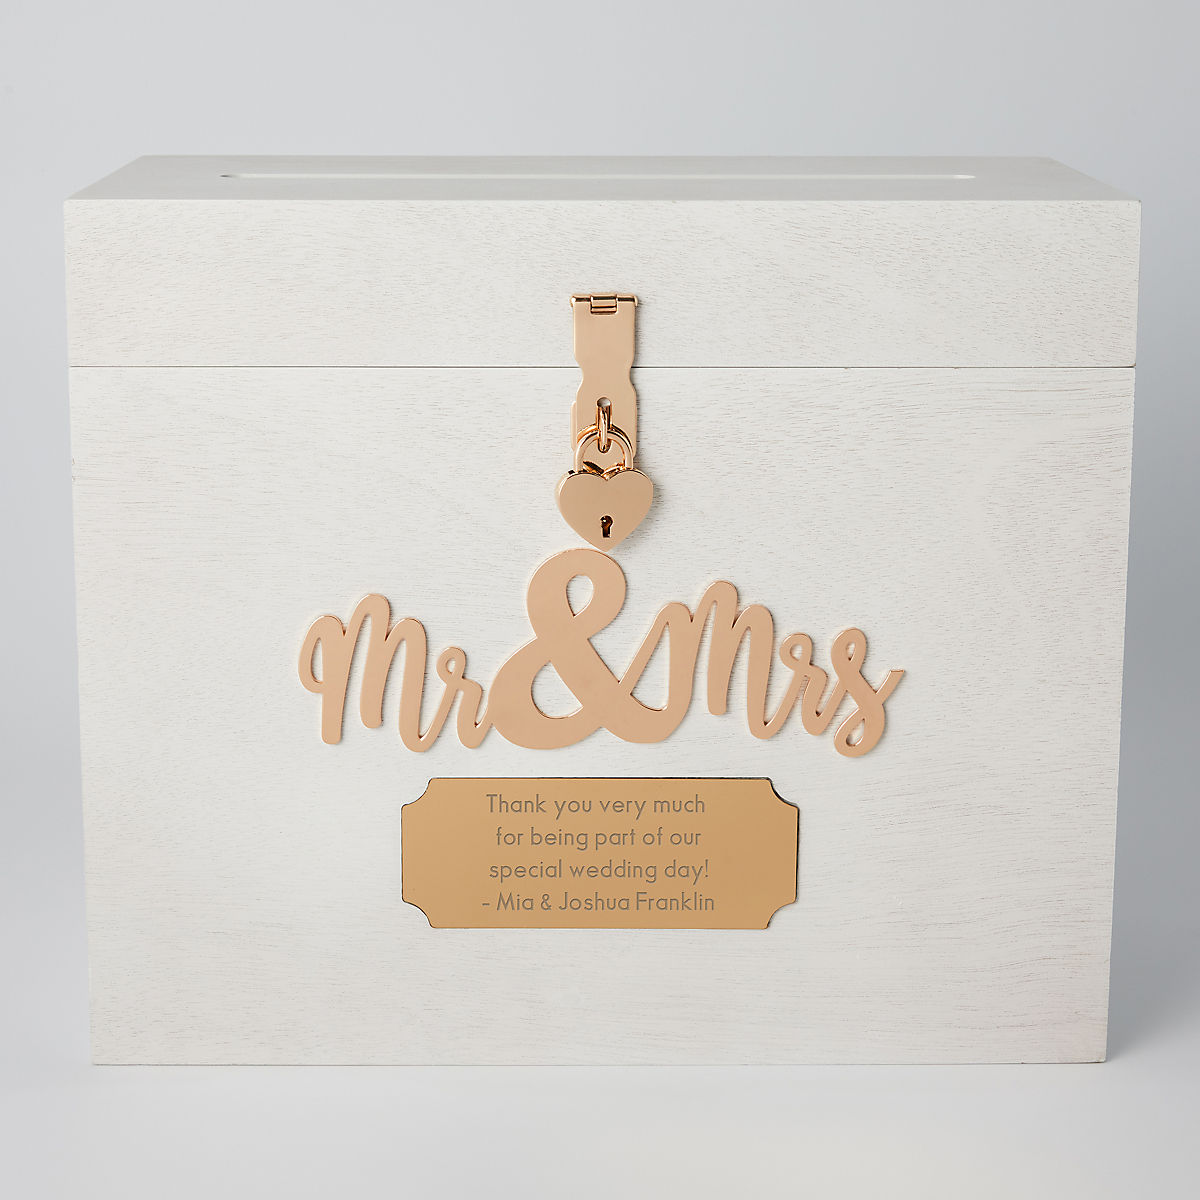 perfect present wedding box for envelopes Personalized wedding box for cards wedding box white box with slot idea for wedding gift